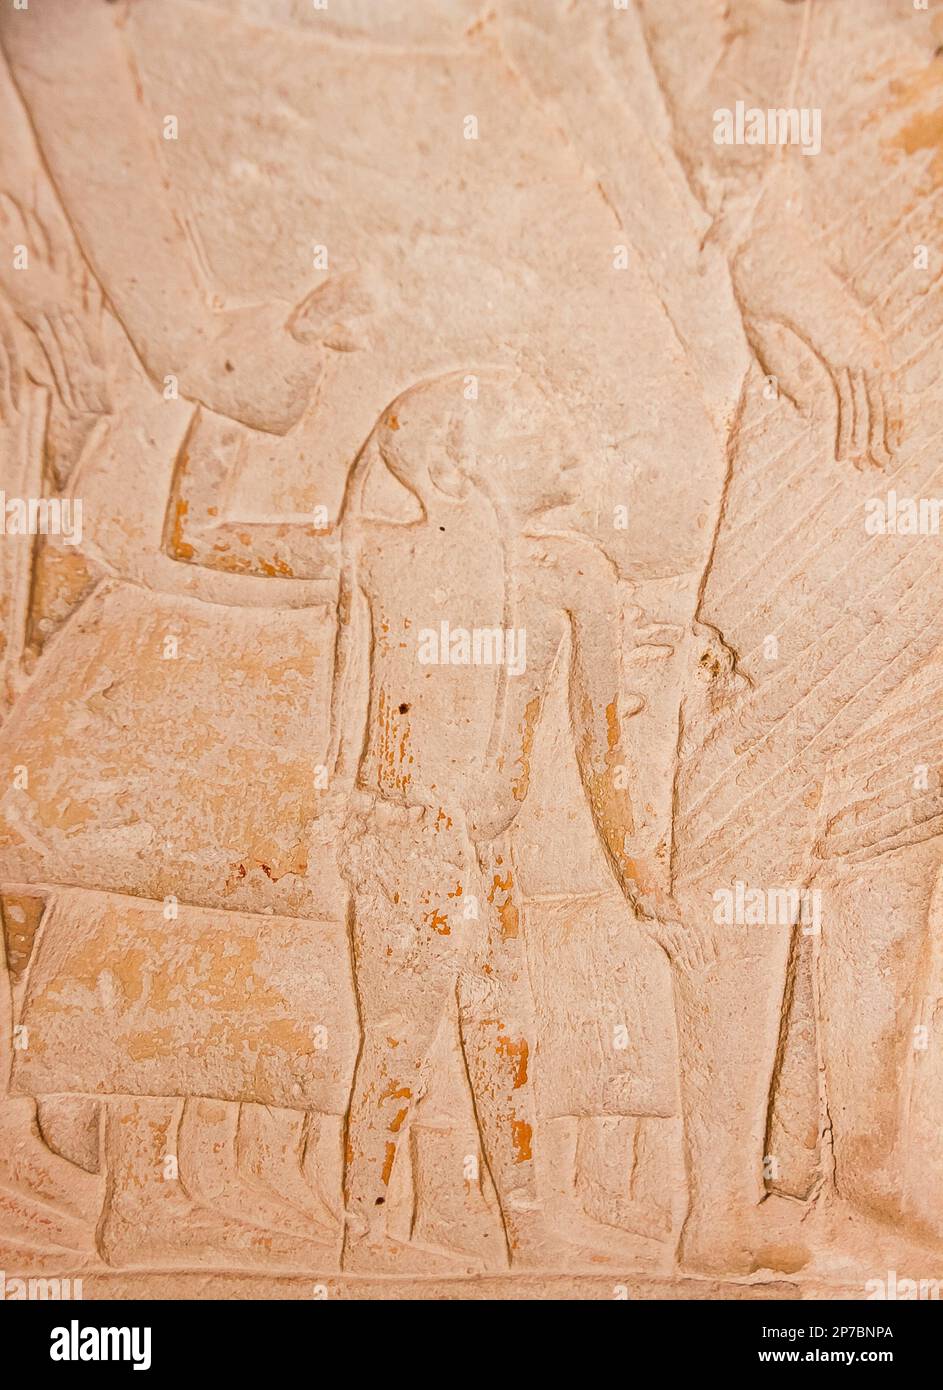 Egypt, Saqqara,  tomb of Horemheb,  inner room, South wall. Foreign captives, with wives and children. Stock Photo